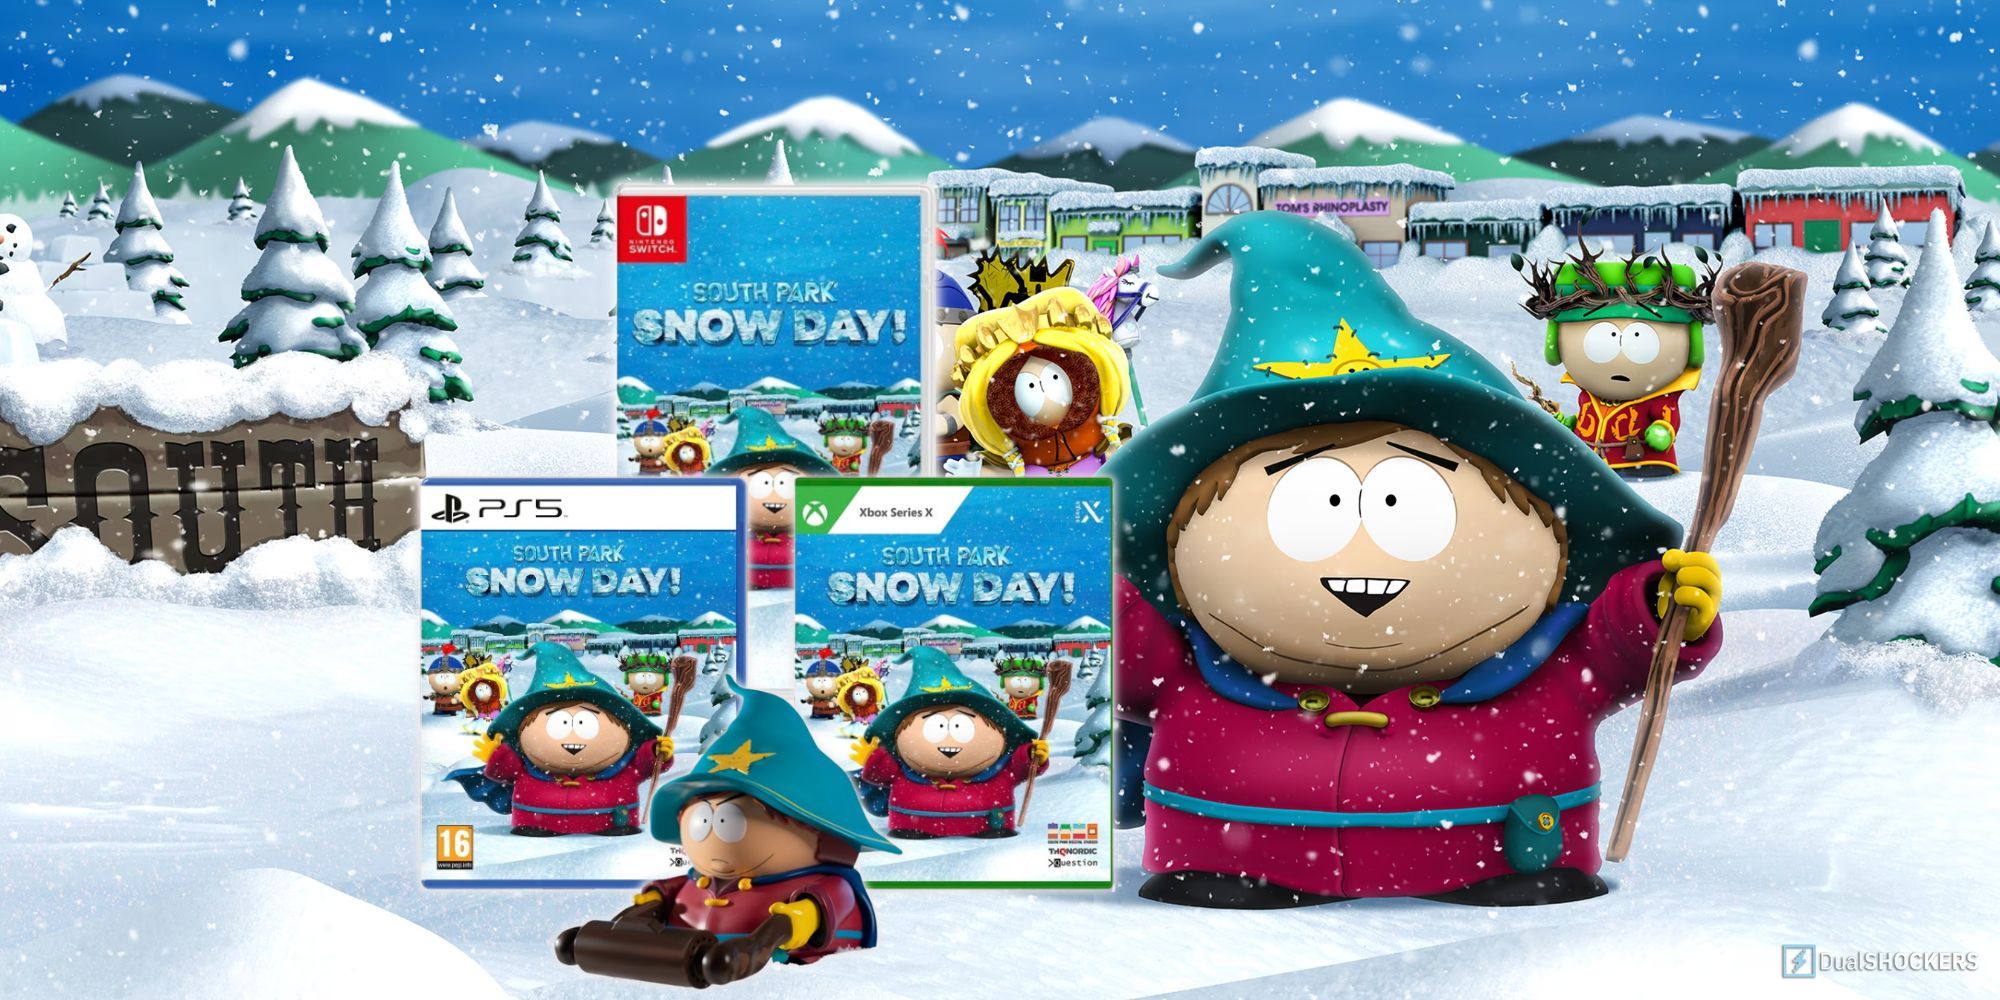 Feature image with the South Park: Snow Day! background behind the platform covers of the game and a figure of Cartman.